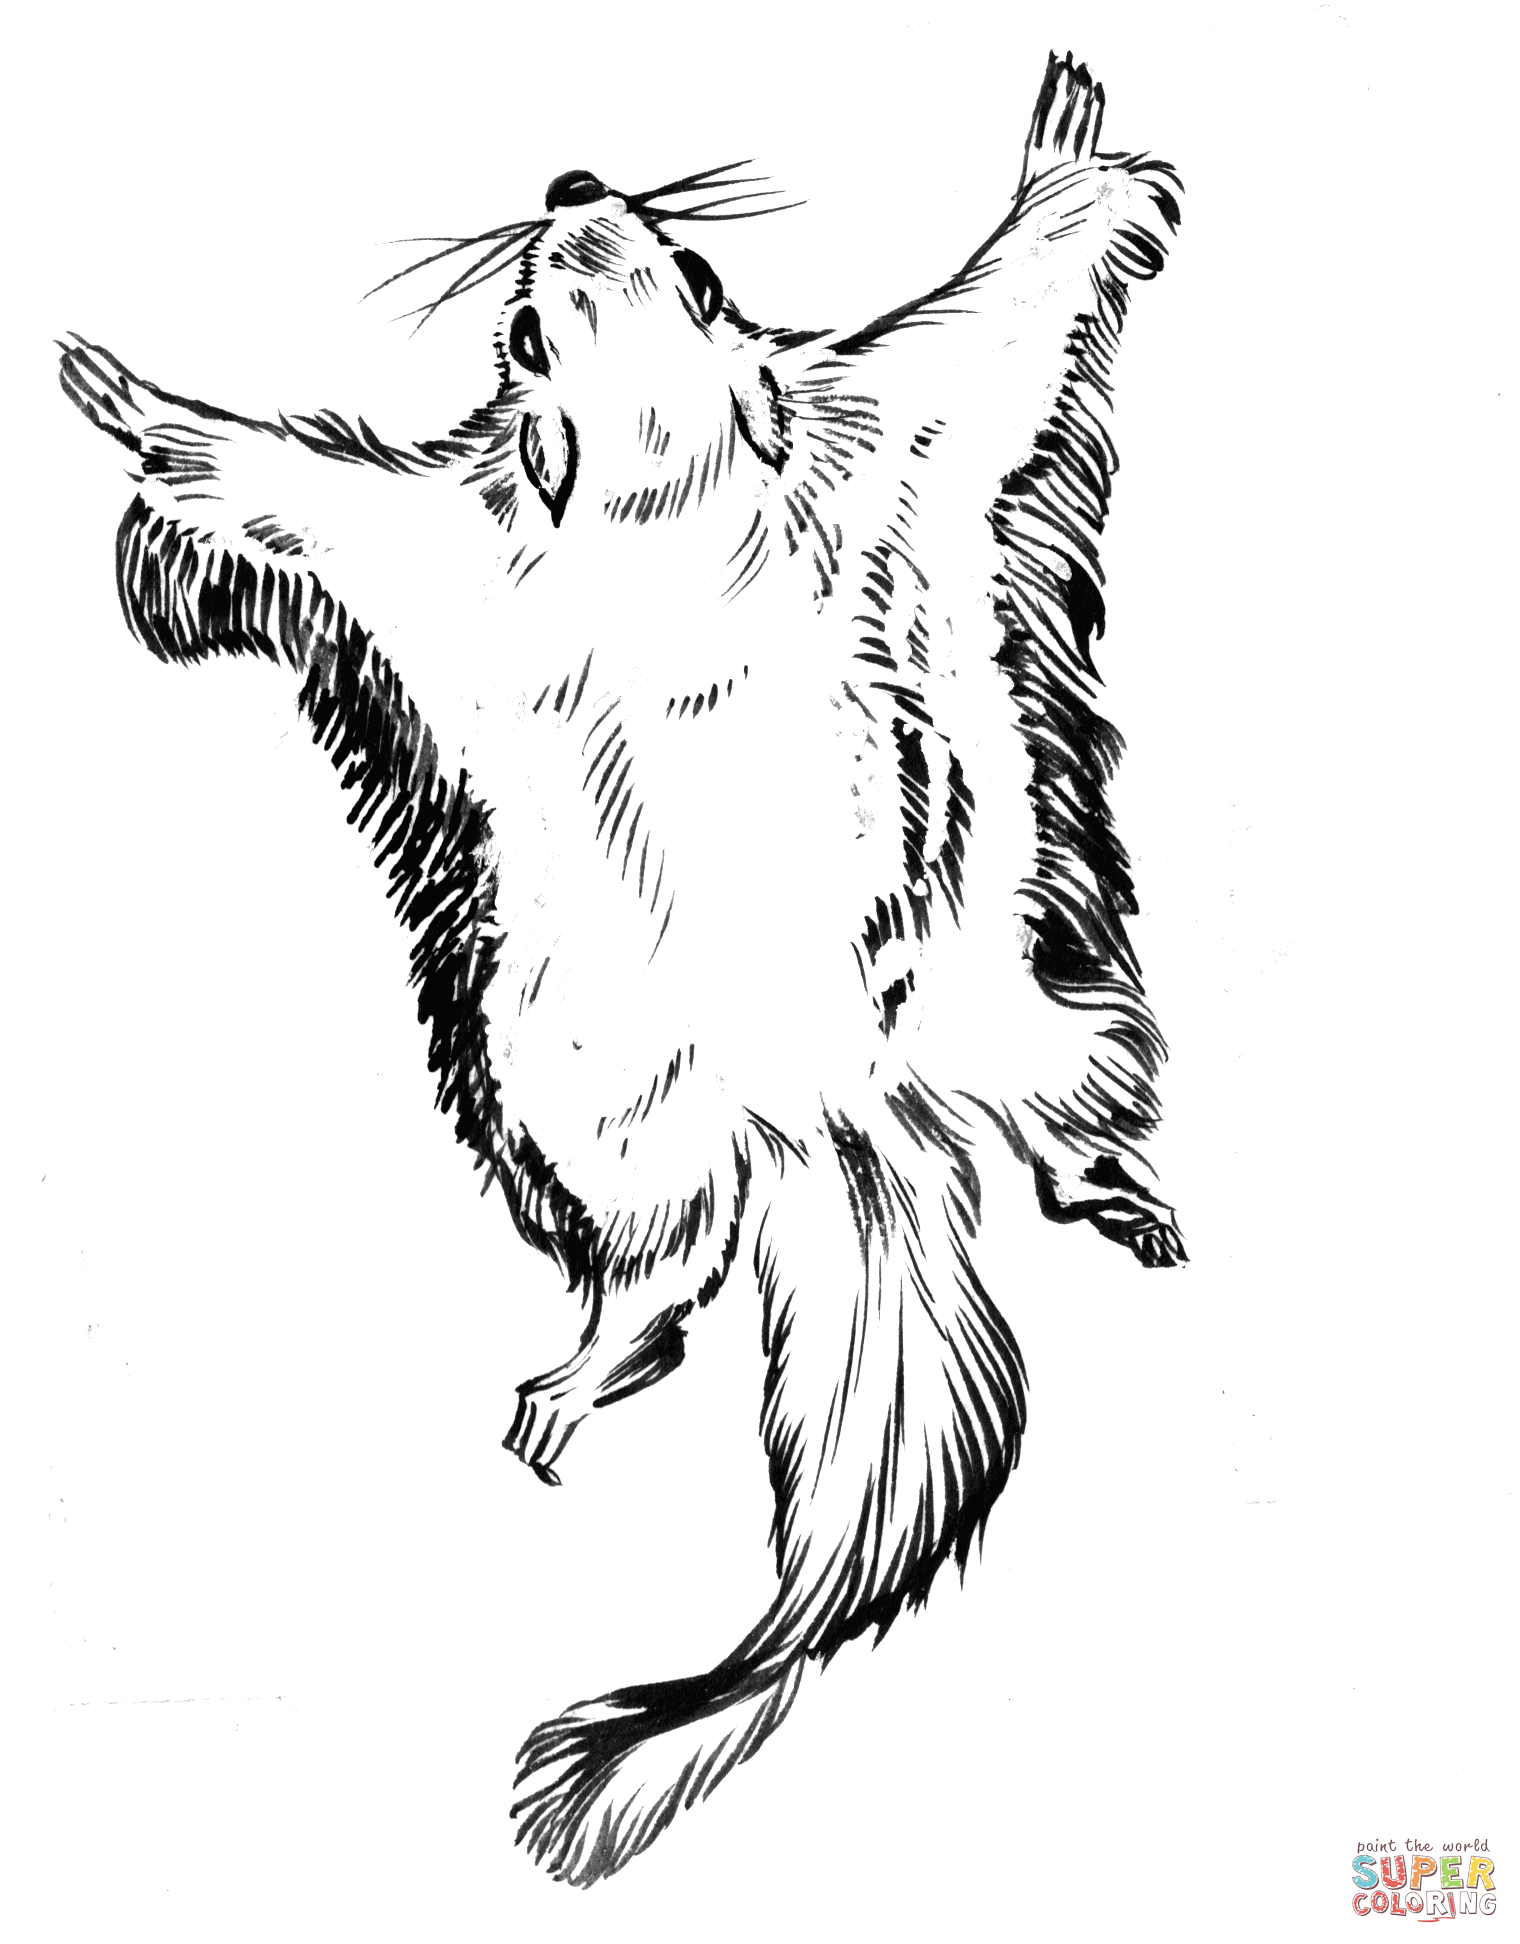 Squirrels coloring pages | Free Coloring Pages